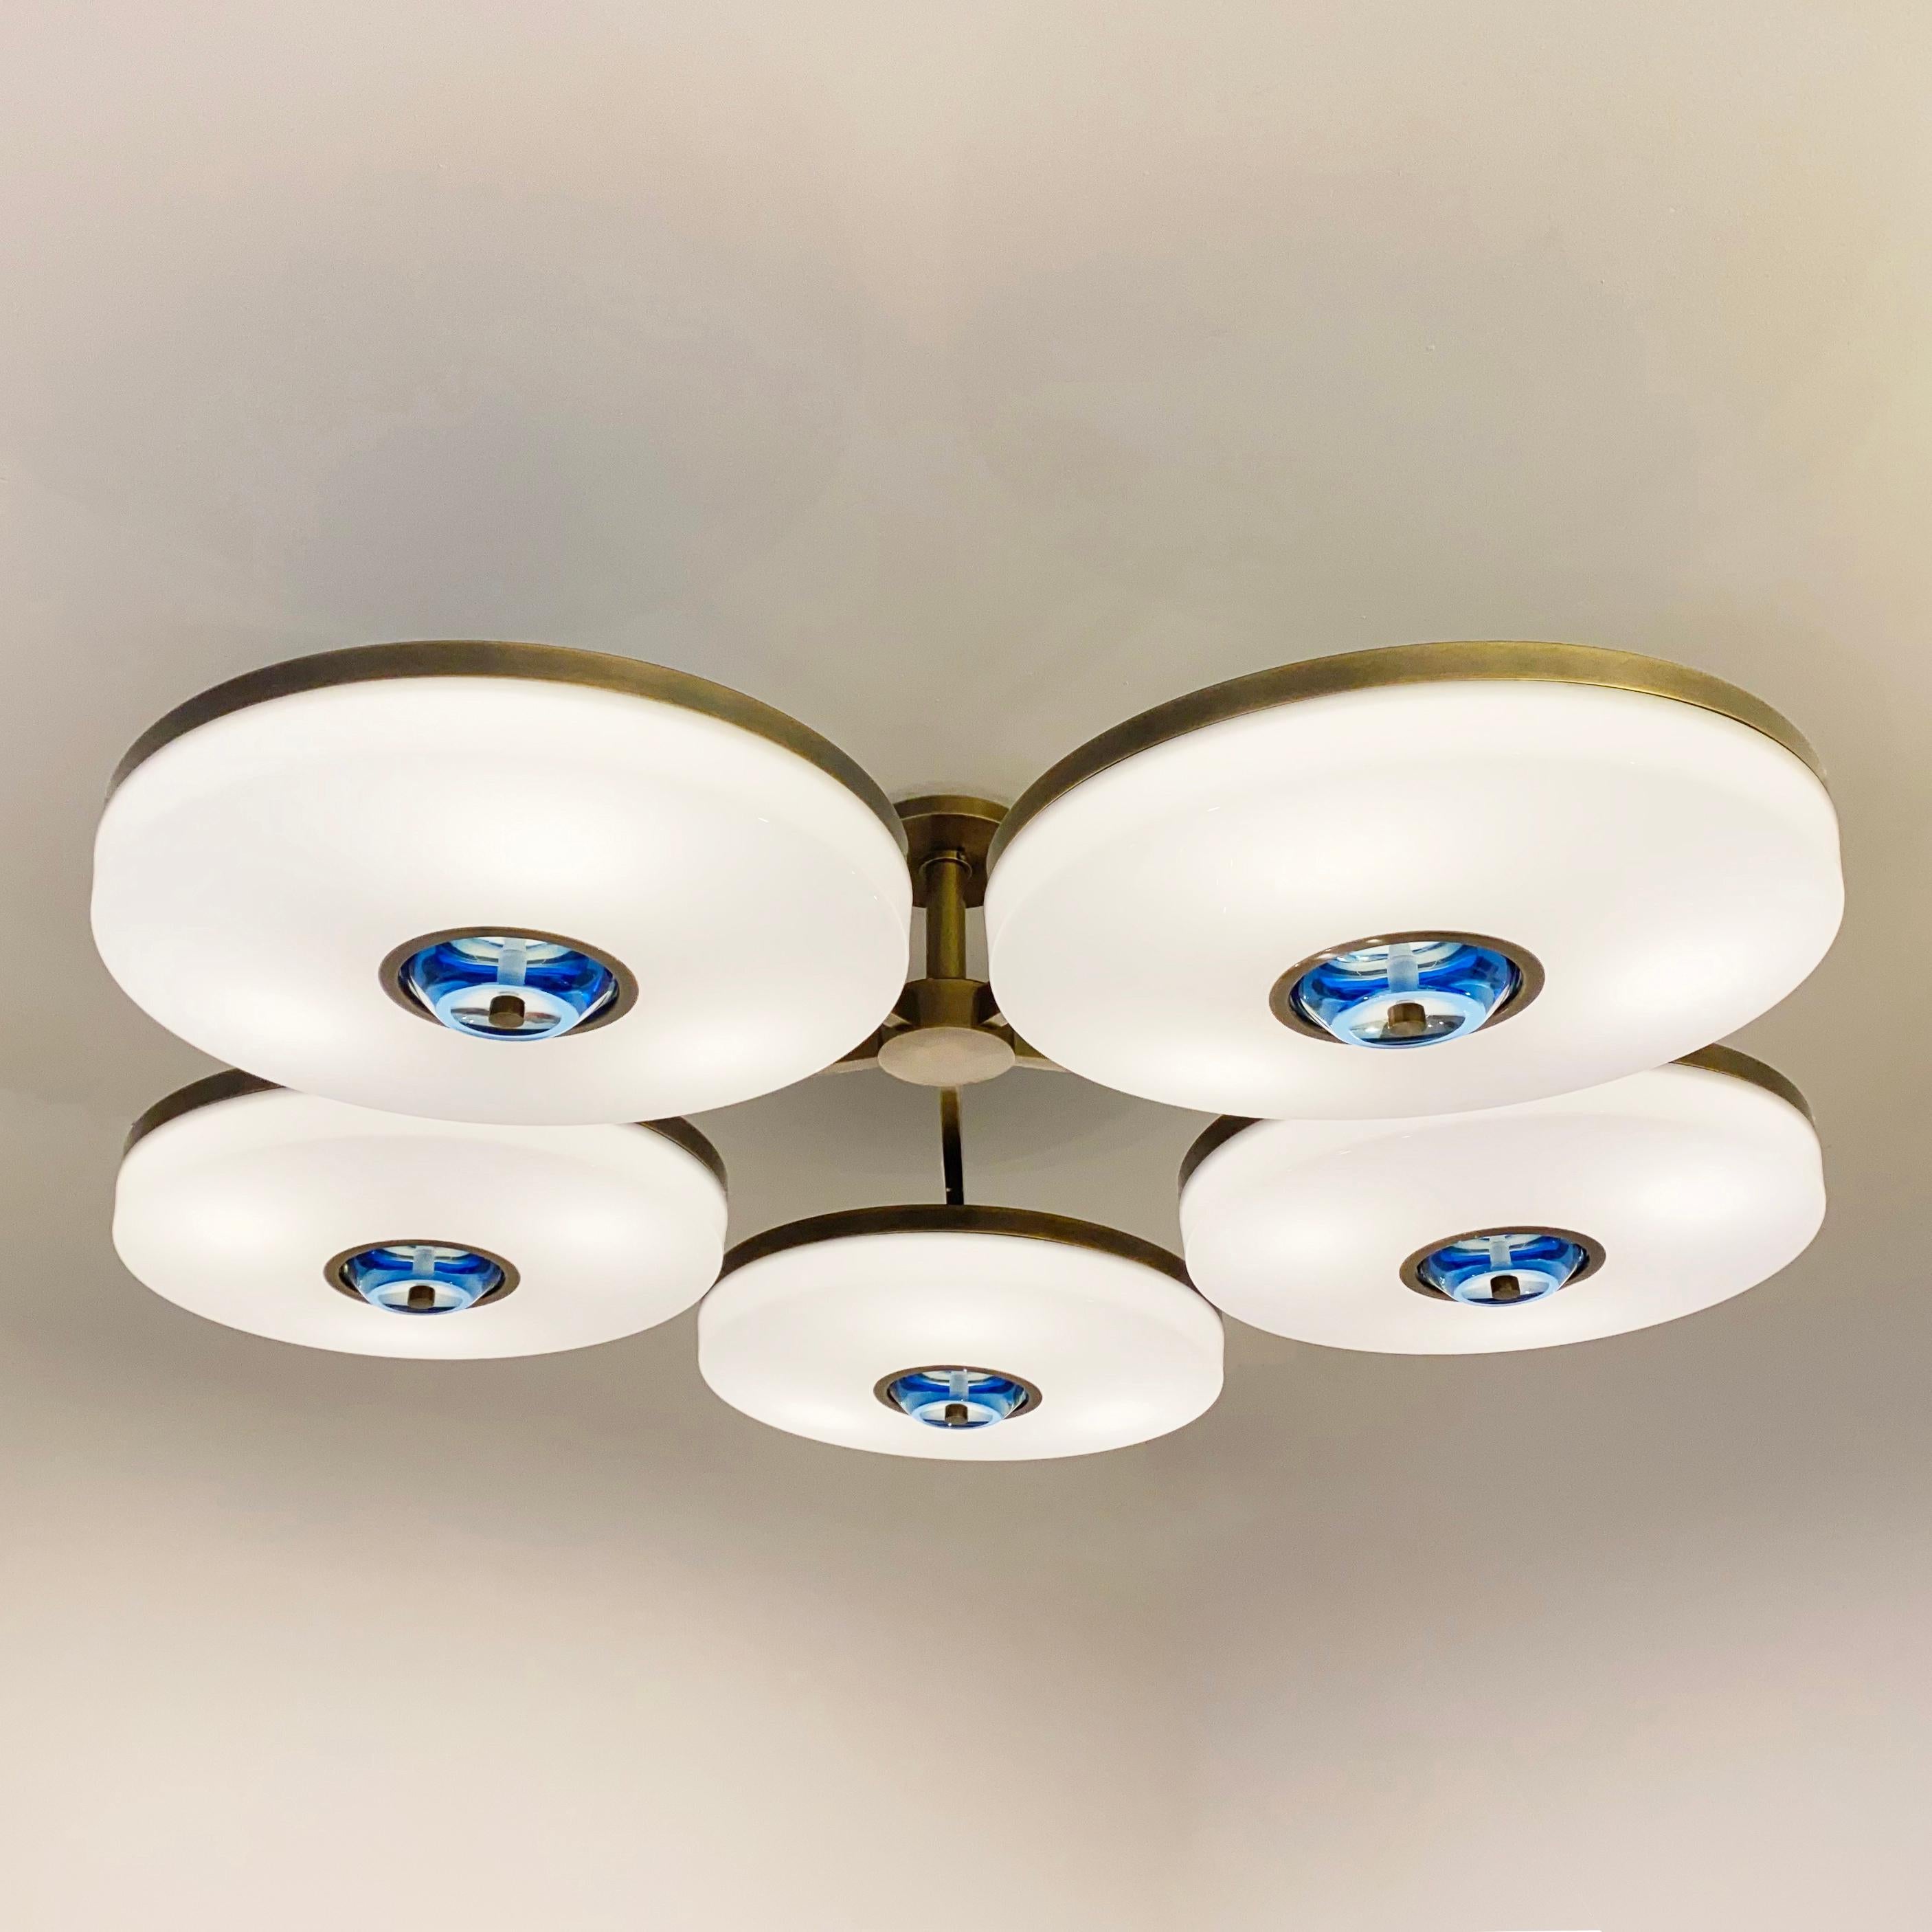 Iris N. 5 Ceiling Light by Gaspare Asaro-Polished Brass Finish In New Condition For Sale In New York, NY